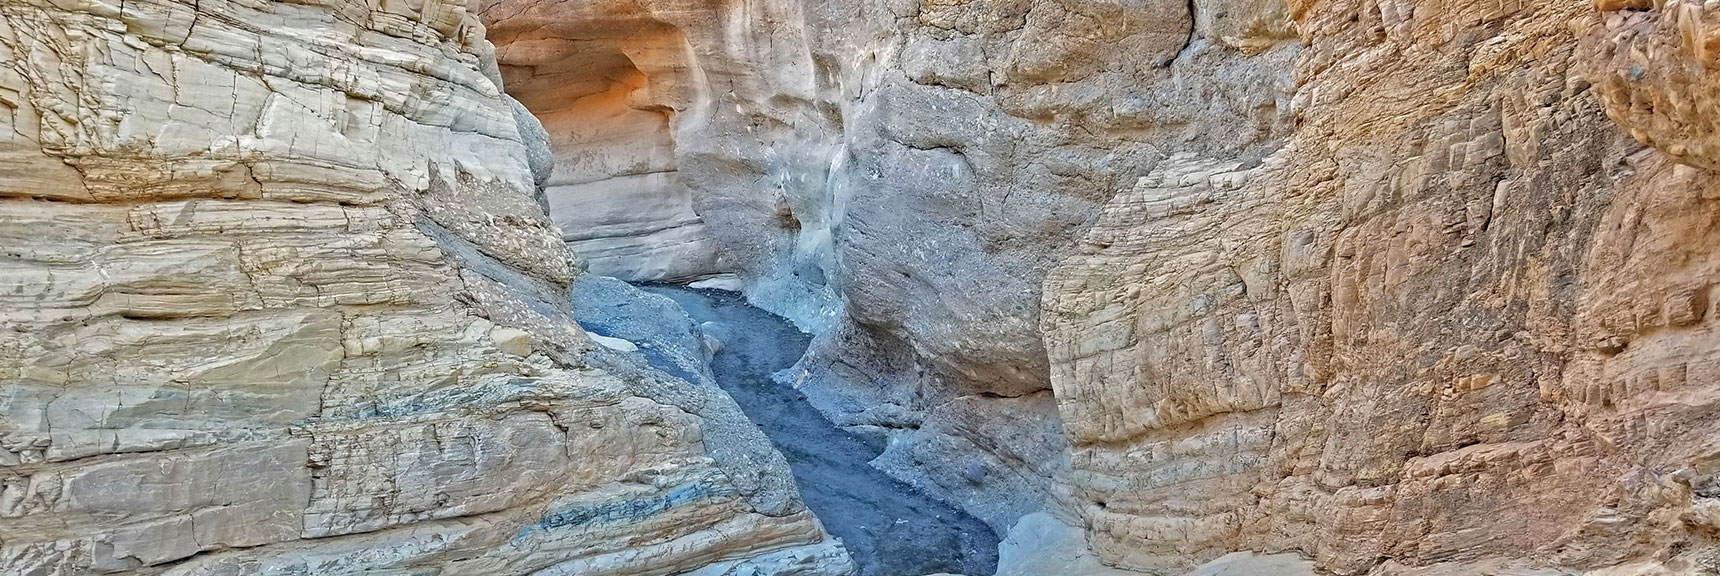 Mosaic Canyon, Above Stovepipe Wells, Death Valley National Park, California